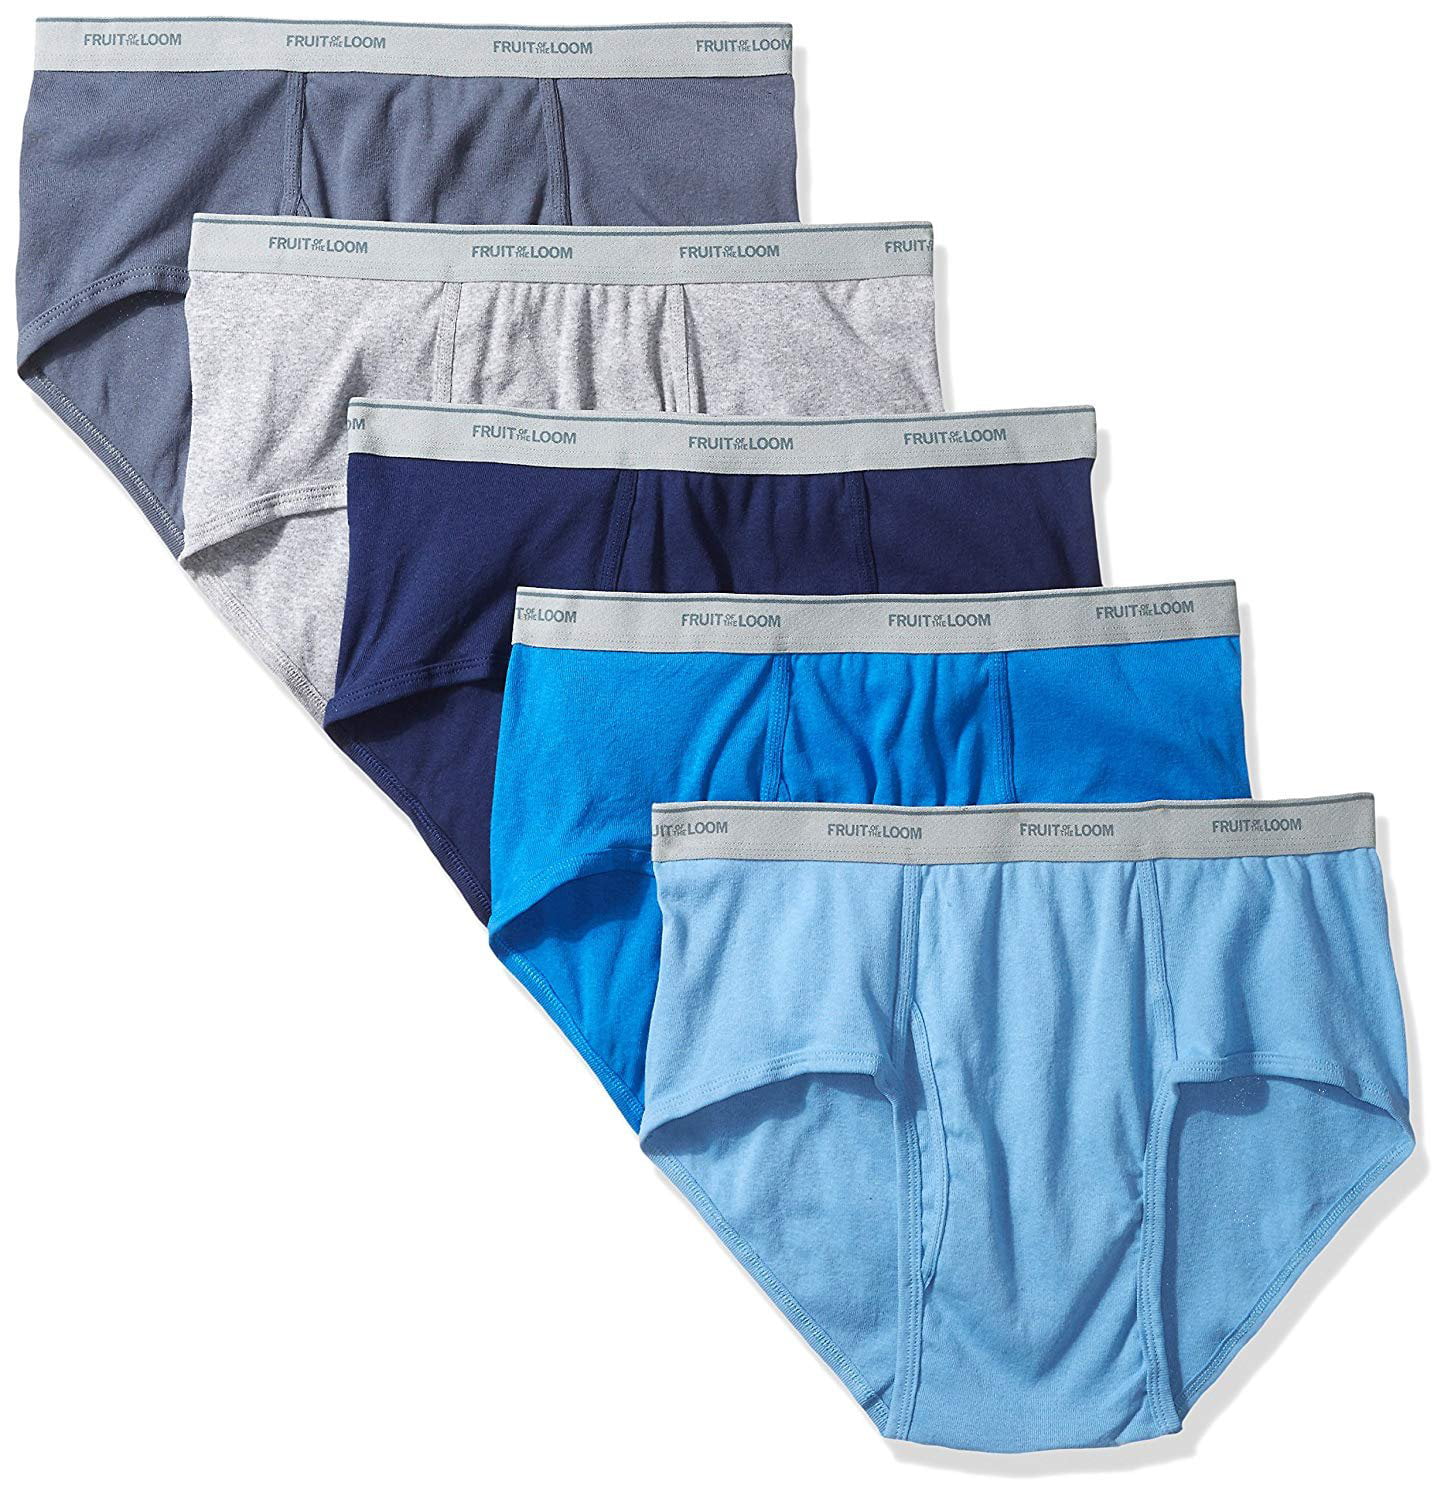 Fruit of the Loom Men's Fashion Briefs - Colors May Vary, Assorted ...